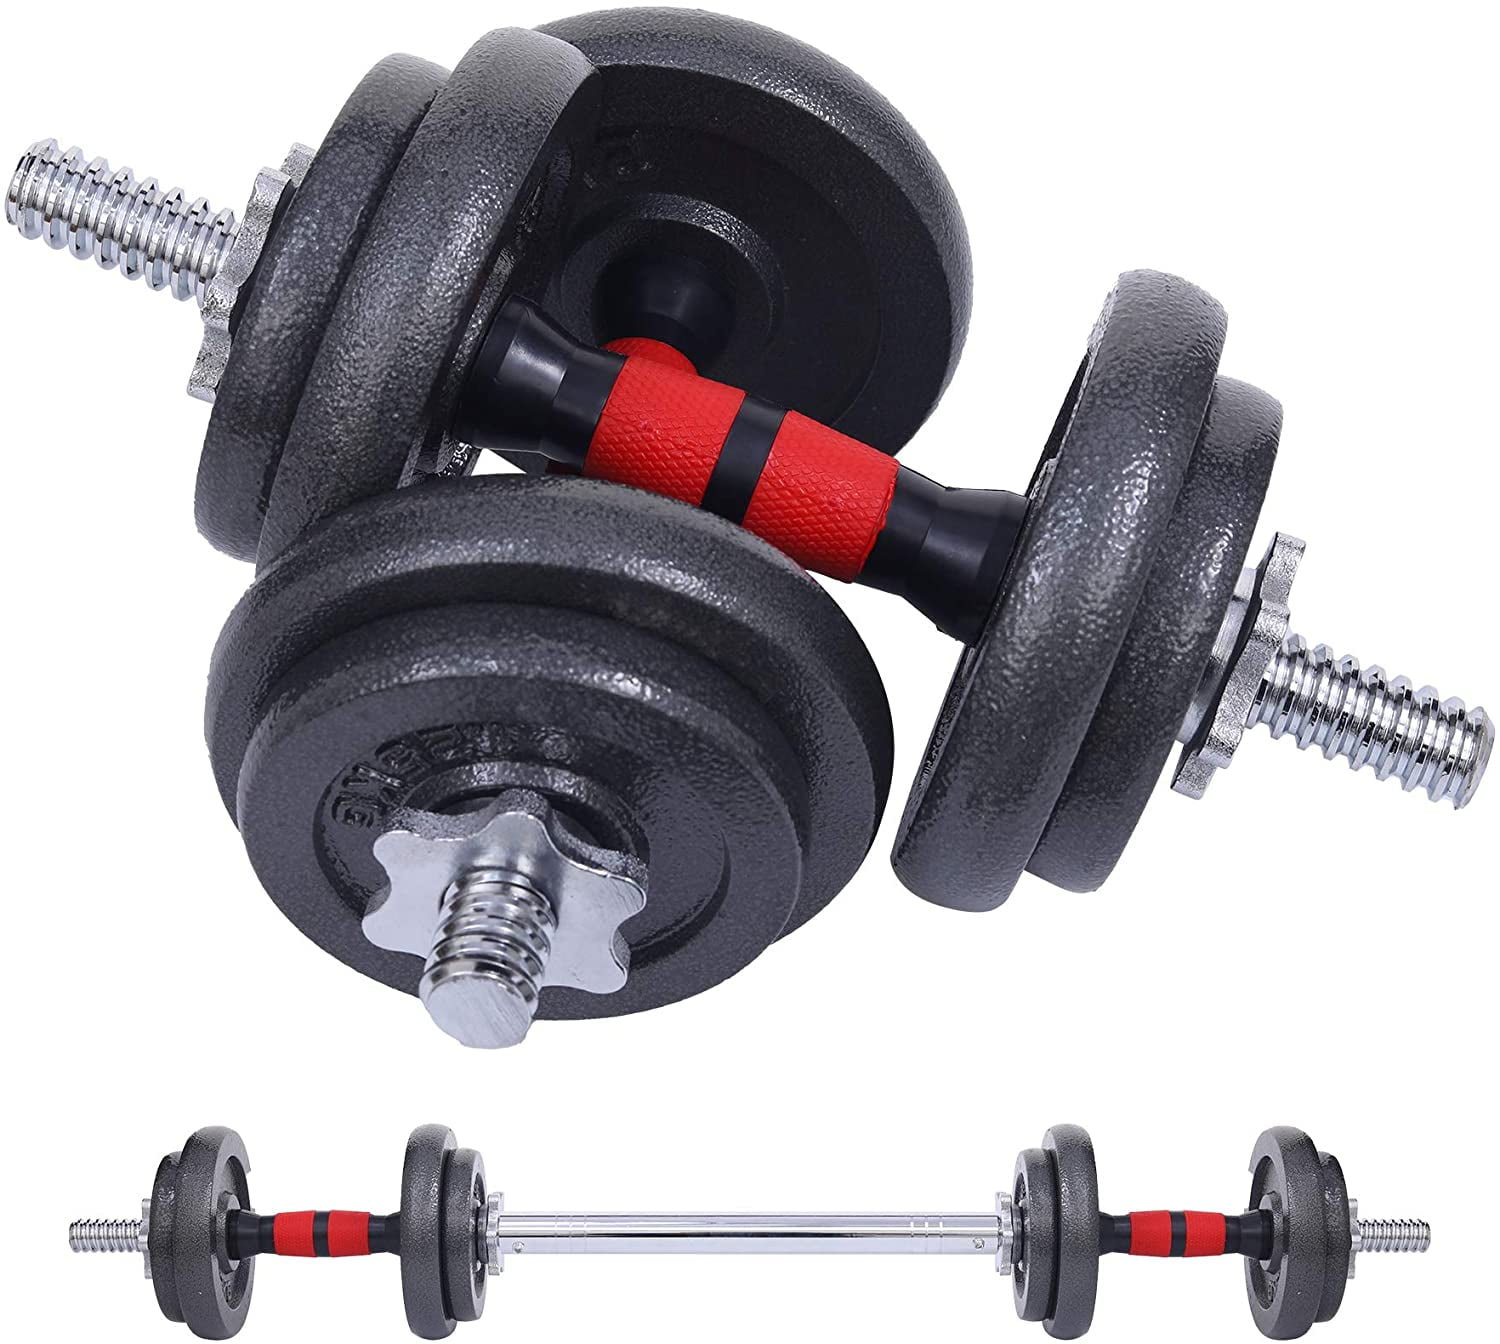 22-88LB Adjustable Dumbbell Set Weight Barbell Plates GYM Home Training Workout 